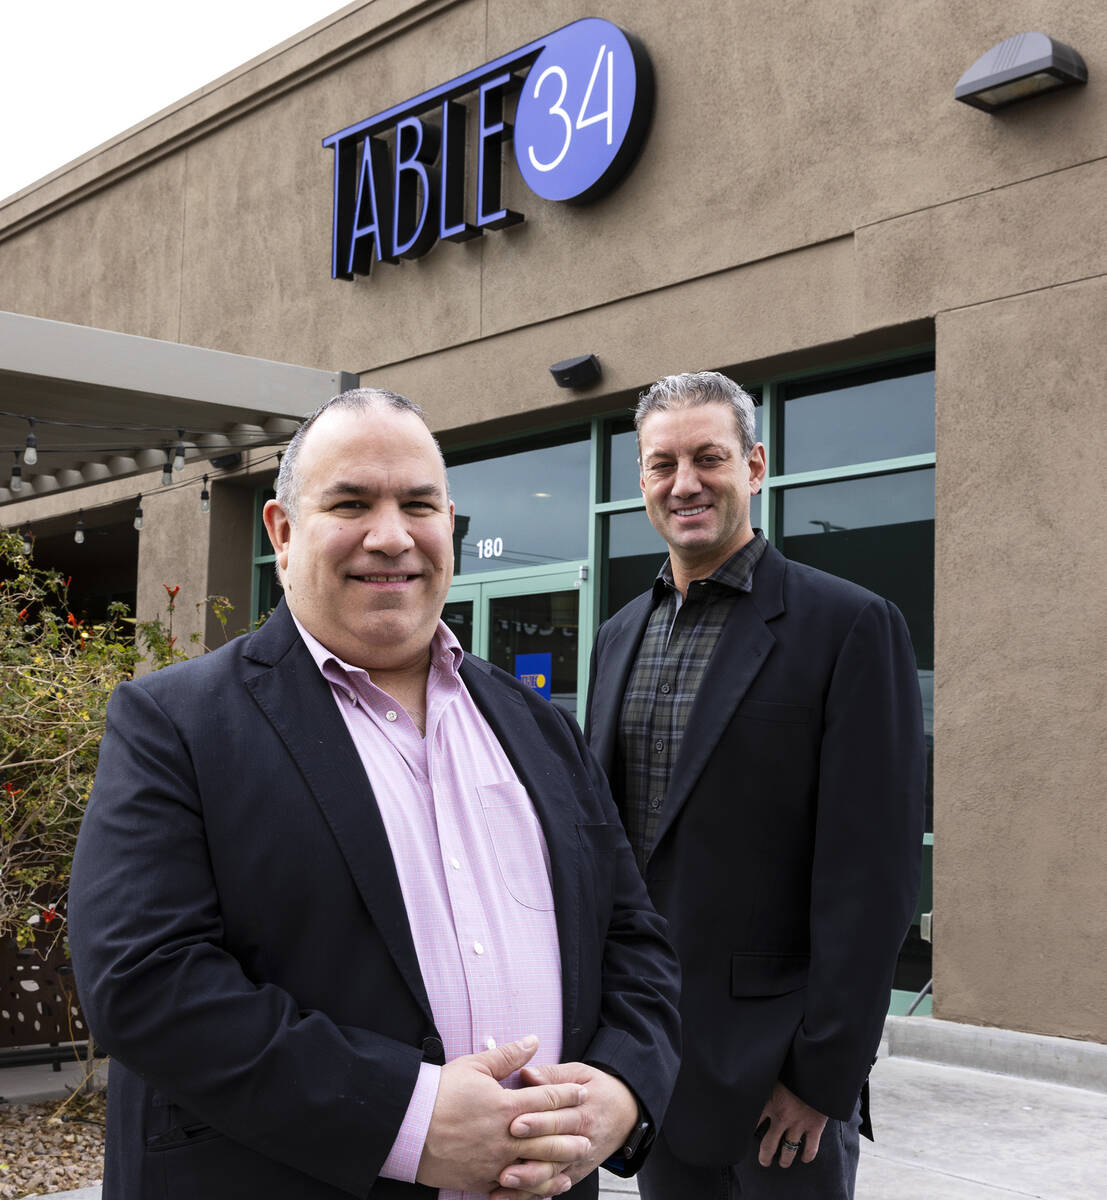 Table 34 owners Constantin Alexander, left, and Evan Glusman pose for a photo outside their Las ...